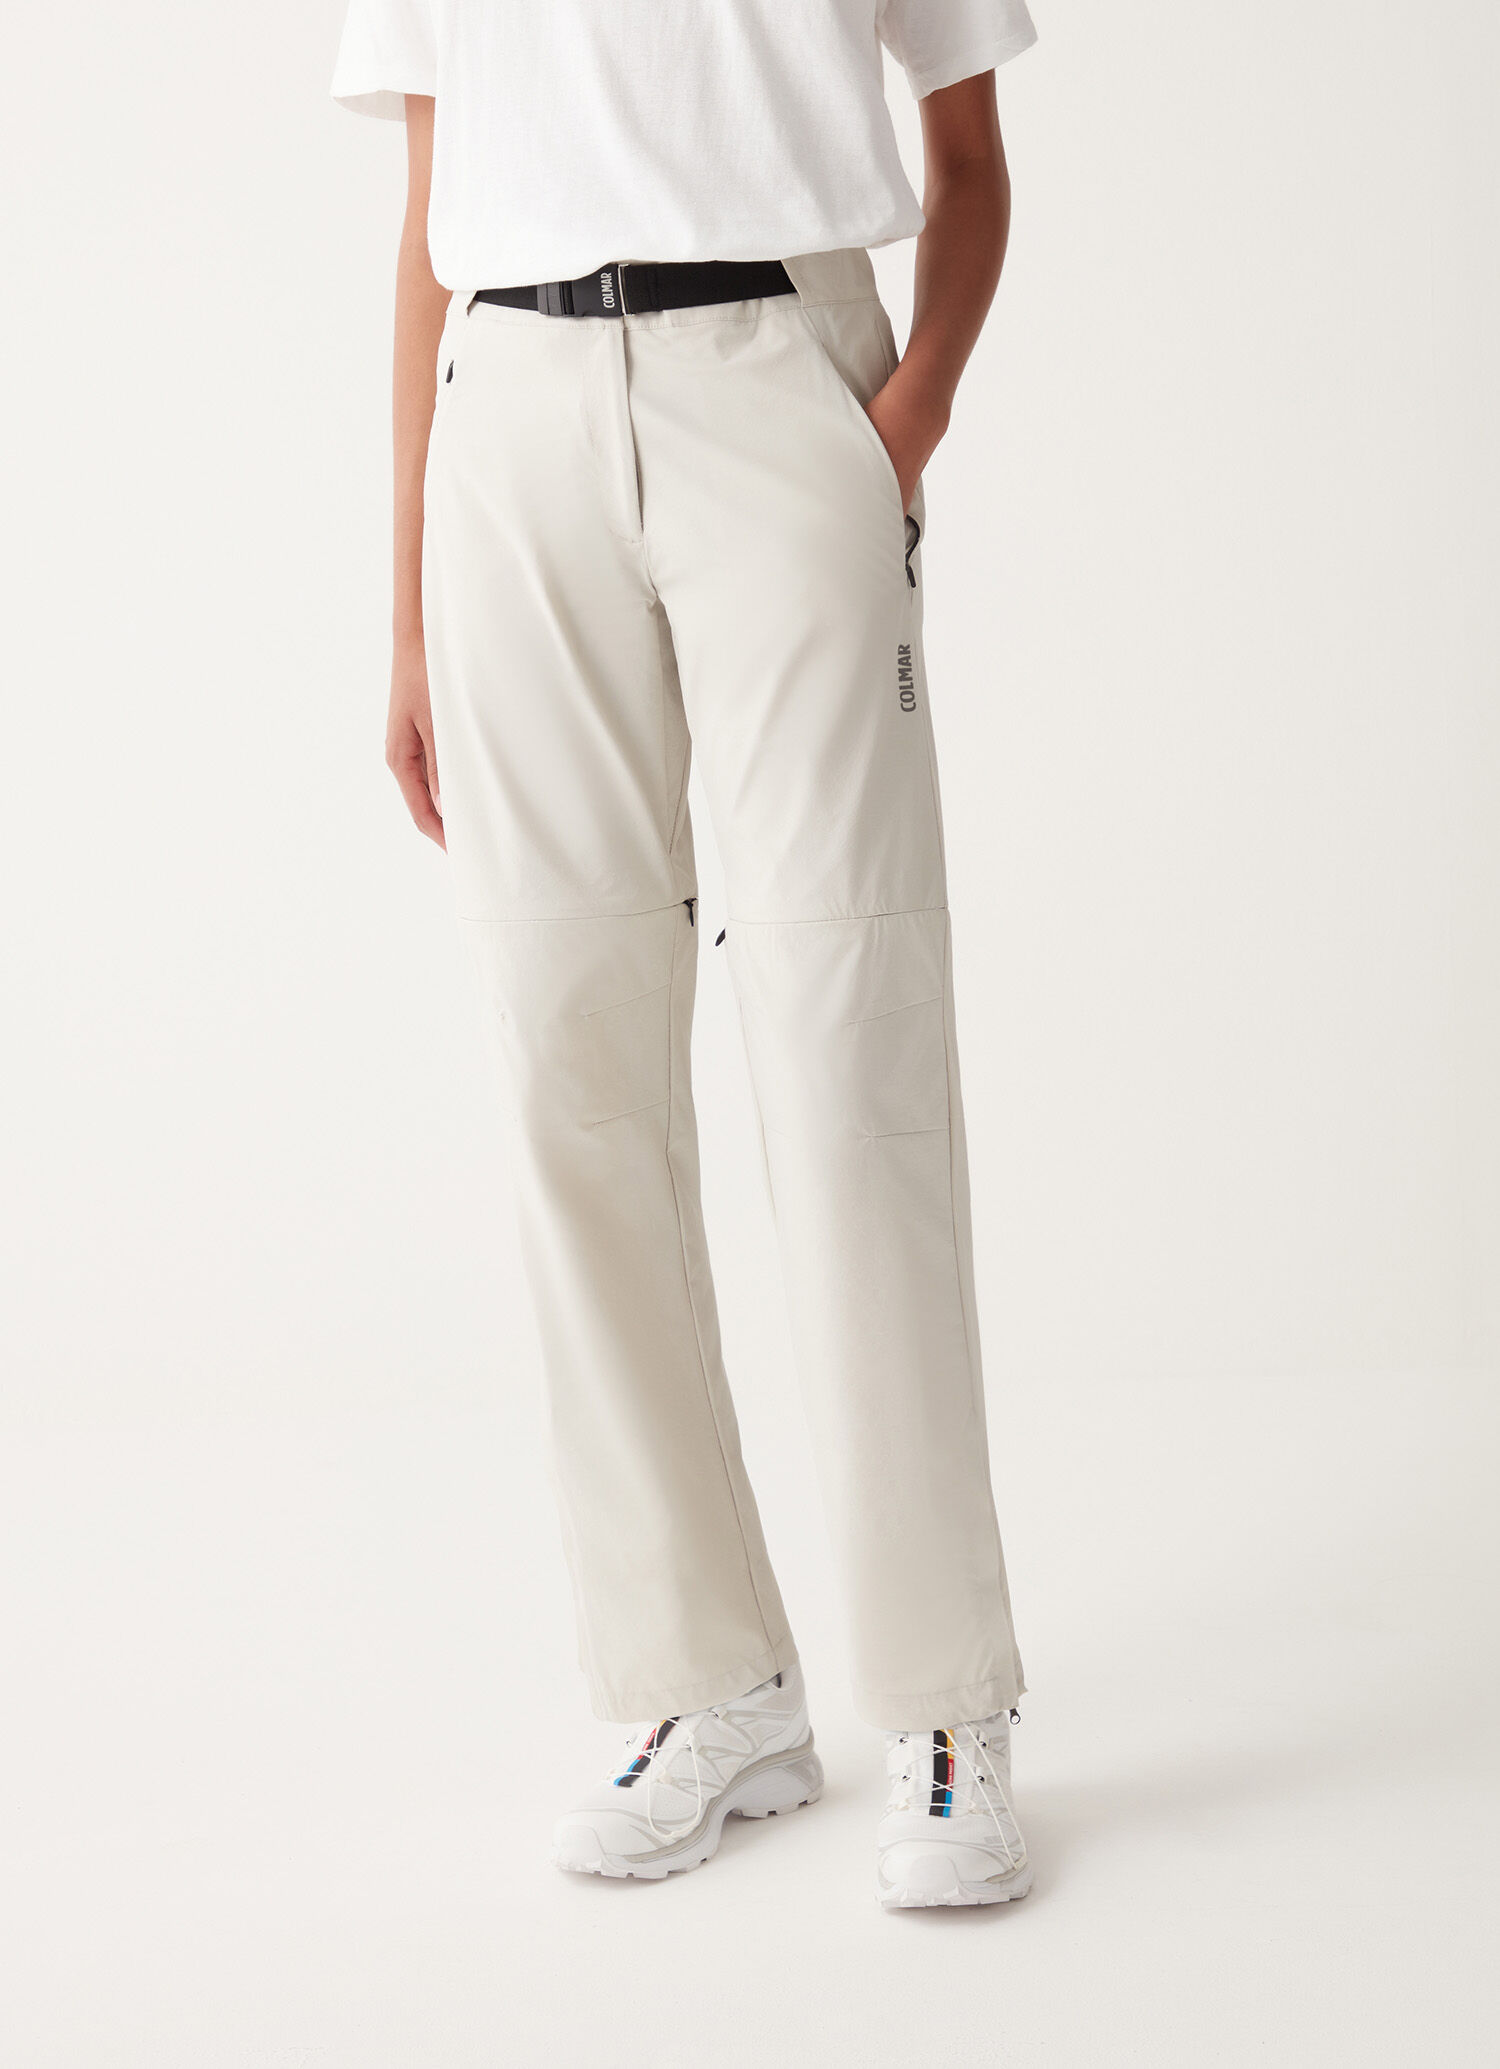 Women's technical trousers and technical shorts | Colmar